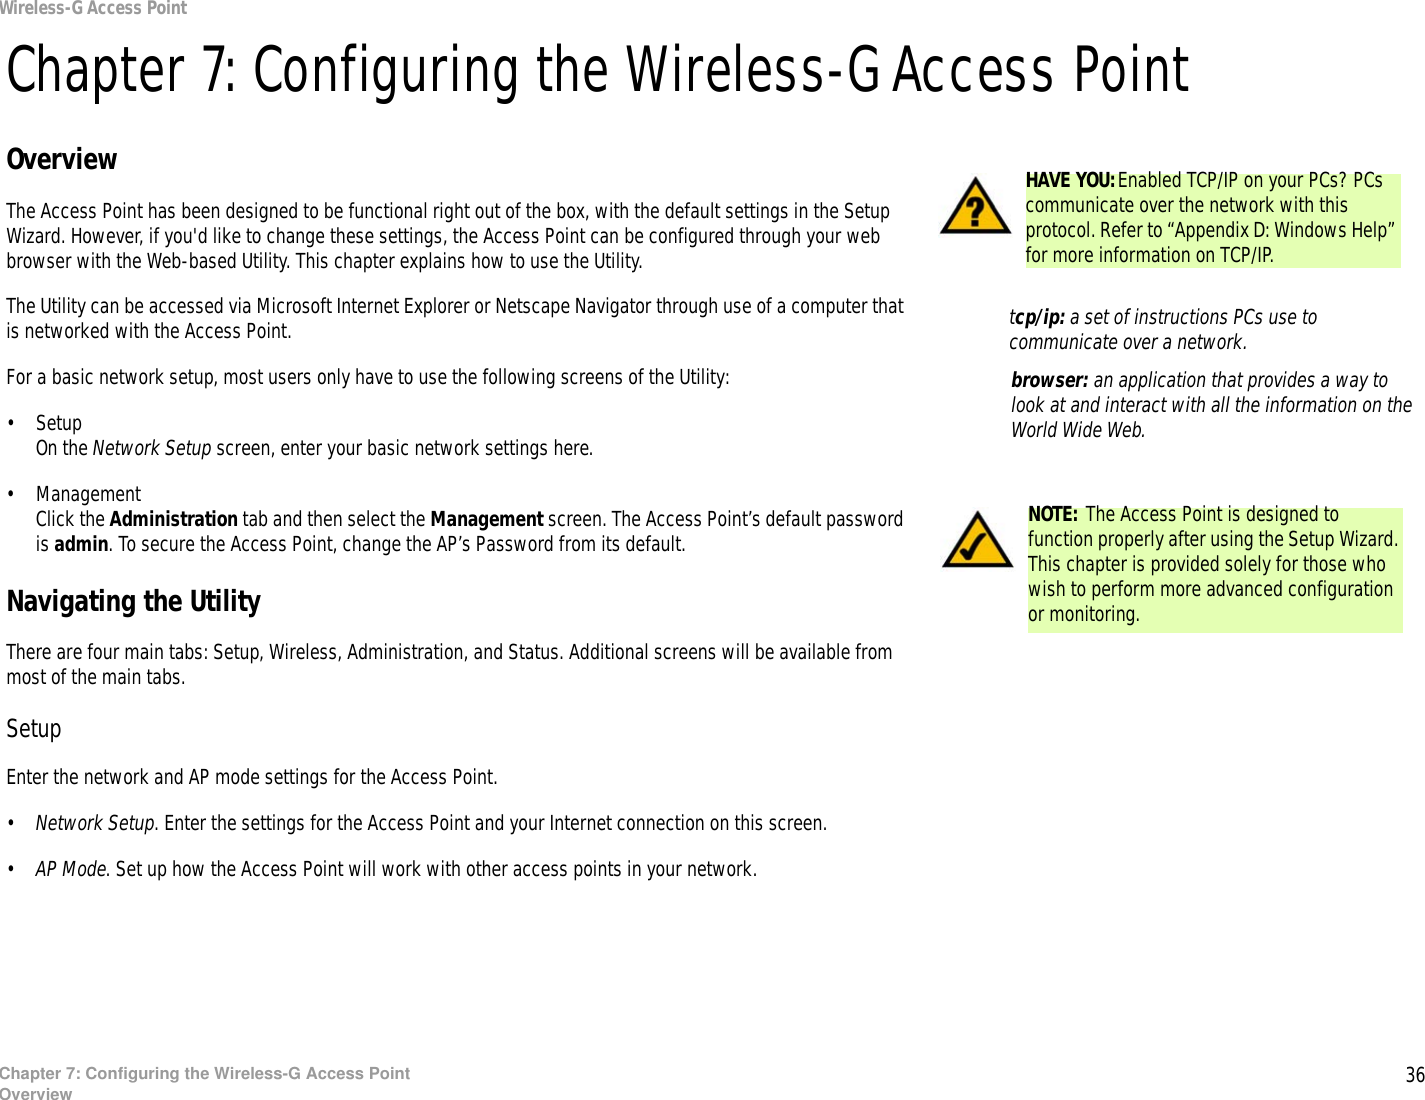 36Chapter 7: Configuring the Wireless-G Access PointOverviewWireless-G Access PointChapter 7: Configuring the Wireless-G Access PointOverviewThe Access Point has been designed to be functional right out of the box, with the default settings in the Setup Wizard. However, if you&apos;d like to change these settings, the Access Point can be configured through your web browser with the Web-based Utility. This chapter explains how to use the Utility.The Utility can be accessed via Microsoft Internet Explorer or Netscape Navigator through use of a computer that is networked with the Access Point.For a basic network setup, most users only have to use the following screens of the Utility:• SetupOn the Network Setup screen, enter your basic network settings here.• ManagementClick the Administration tab and then select the Management screen. The Access Point’s default password is admin. To secure the Access Point, change the AP’s Password from its default.Navigating the UtilityThere are four main tabs: Setup, Wireless, Administration, and Status. Additional screens will be available from most of the main tabs.SetupEnter the network and AP mode settings for the Access Point.•Network Setup. Enter the settings for the Access Point and your Internet connection on this screen.•AP Mode. Set up how the Access Point will work with other access points in your network.HAVE YOU:Enabled TCP/IP on your PCs? PCs communicate over the network with this protocol. Refer to “Appendix D: Windows Help” for more information on TCP/IP.NOTE: The Access Point is designed to function properly after using the Setup Wizard. This chapter is provided solely for those who wish to perform more advanced configuration or monitoring.browser: an application that provides a way to look at and interact with all the information on the World Wide Web. tcp/ip: a set of instructions PCs use to communicate over a network.